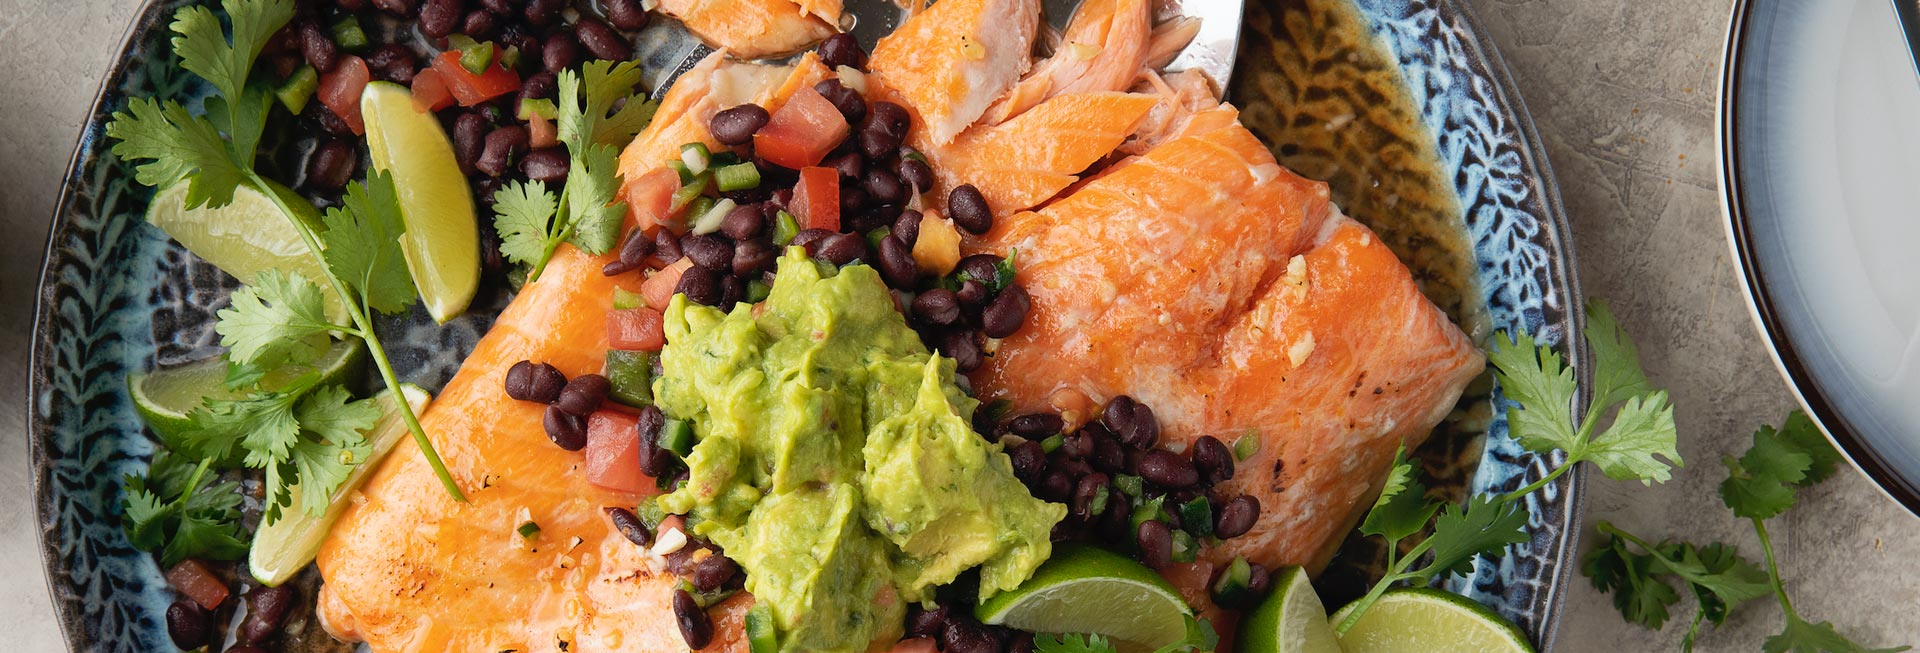 Hot Honey Baked Salmon with Spicy Guacamole and Black Bean Salsa